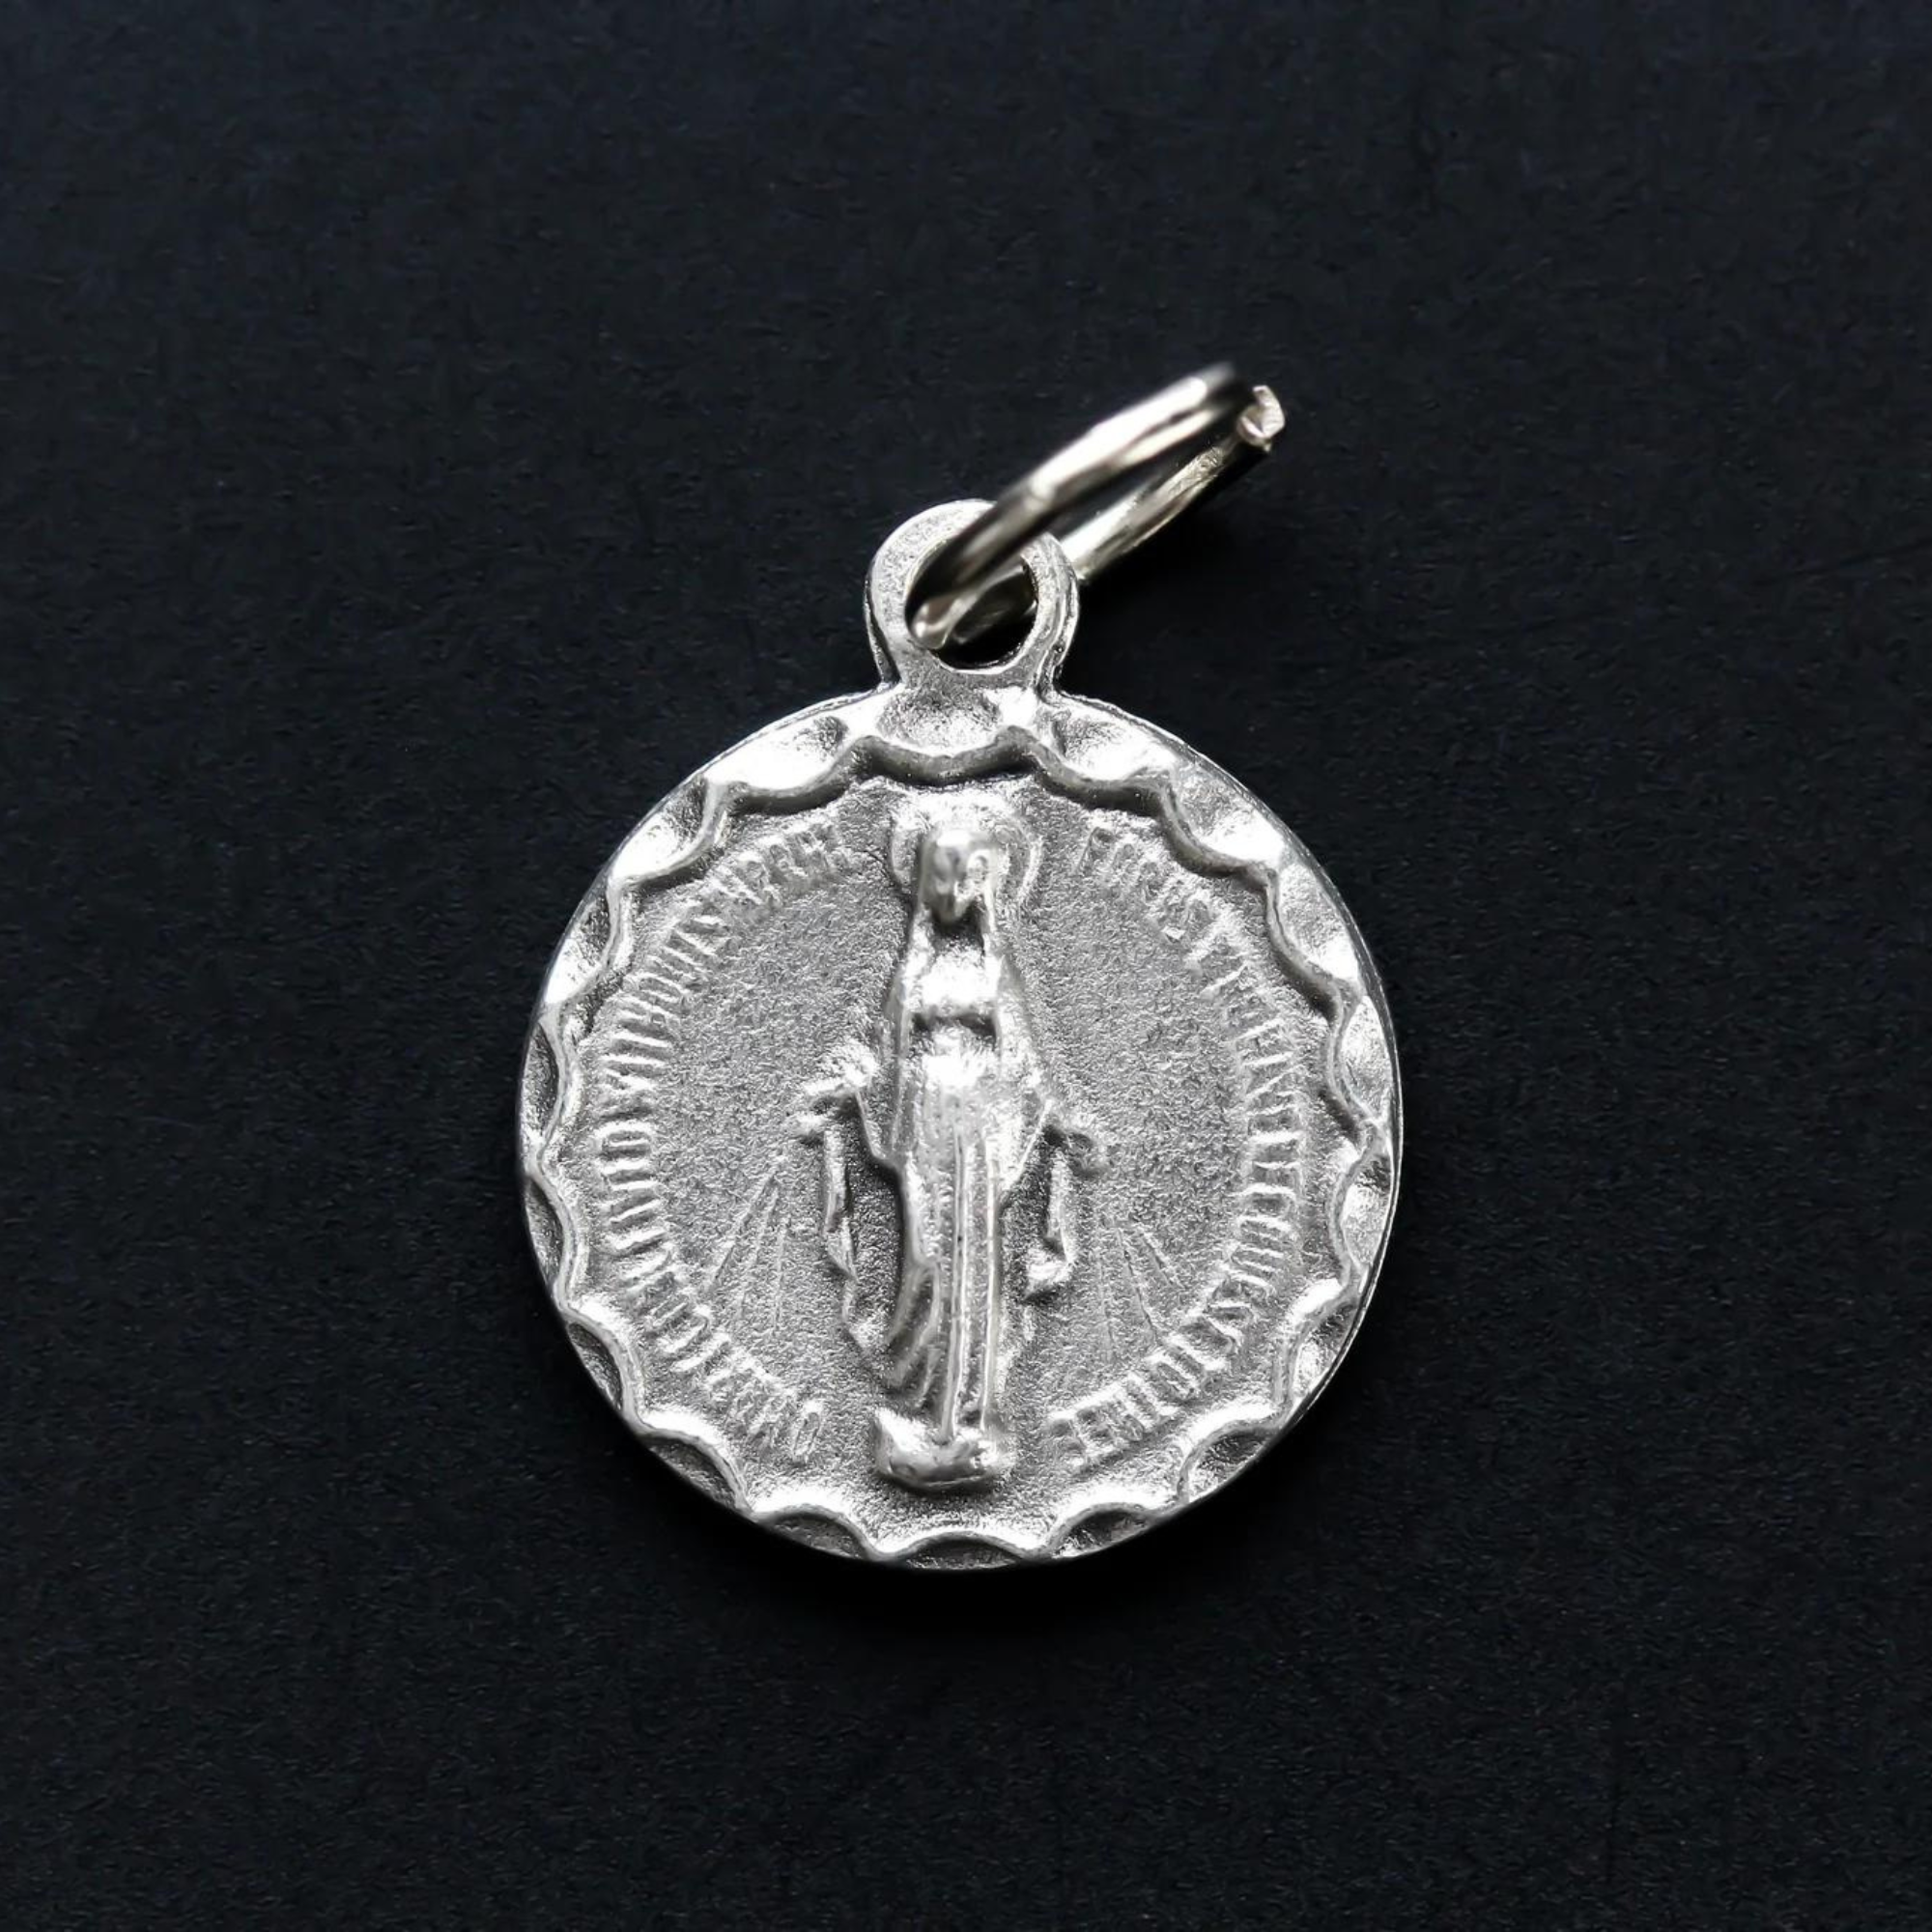 14mm Round Miraculous Mary medal with an ornate scalloped border 